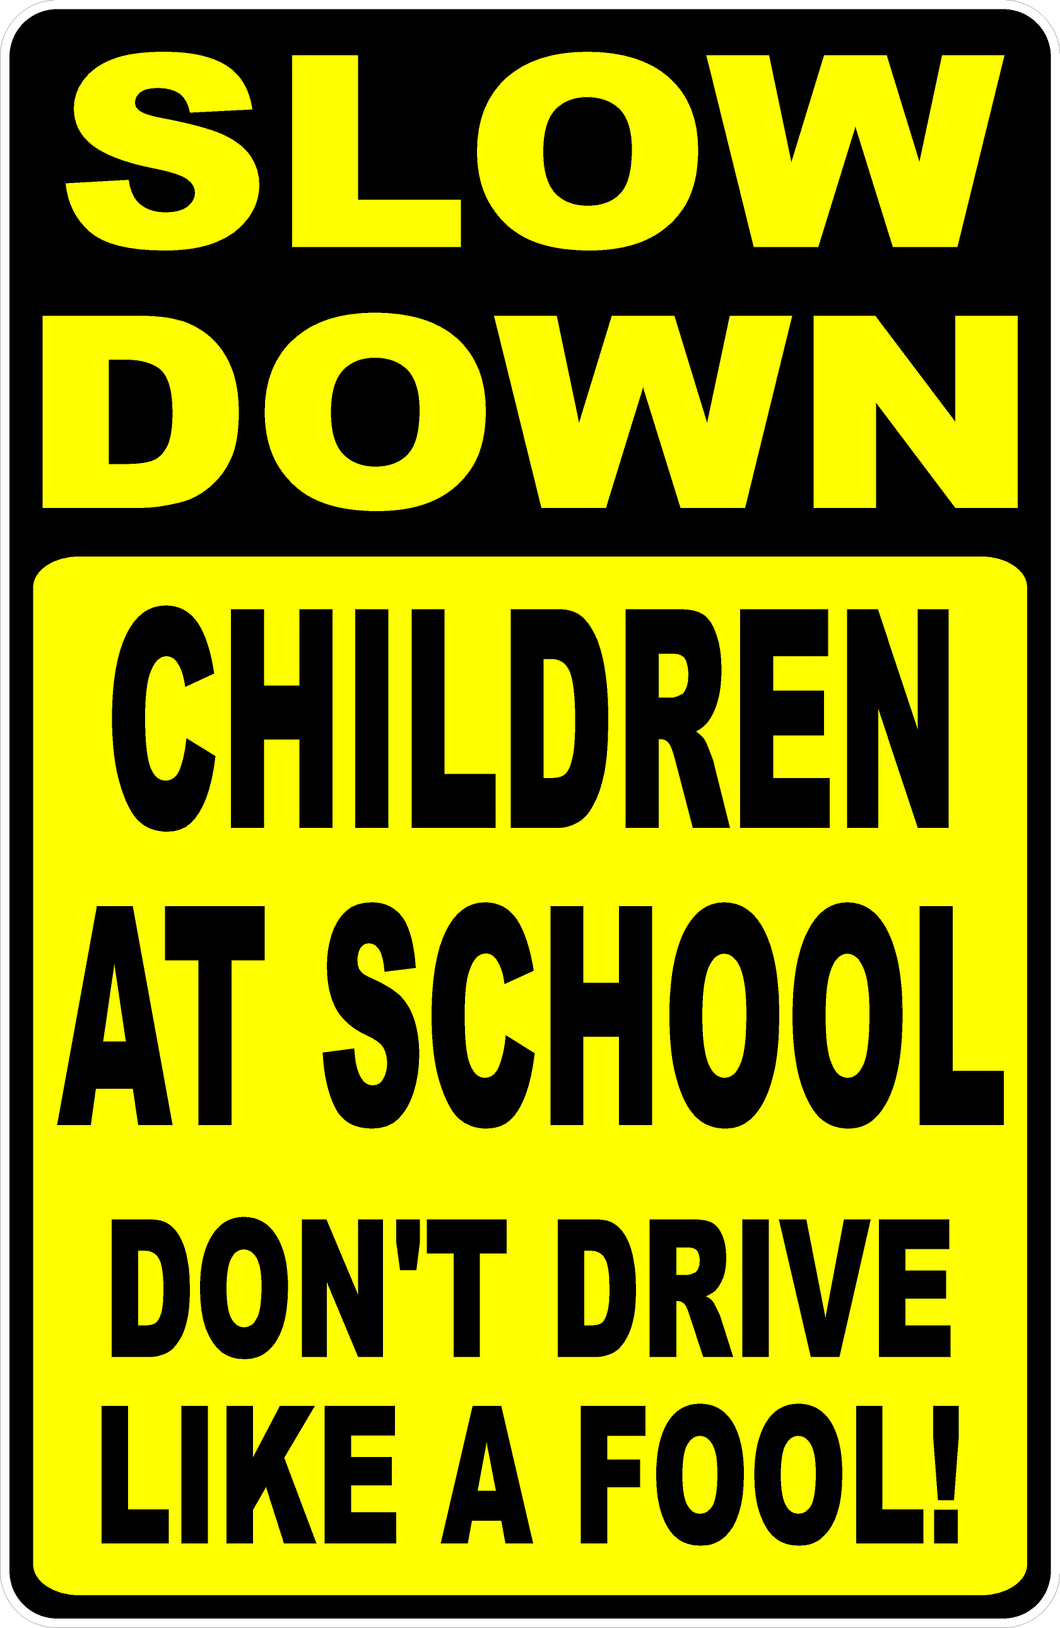 Slow Down Children At School Don't Drive Like A Fool! Sign